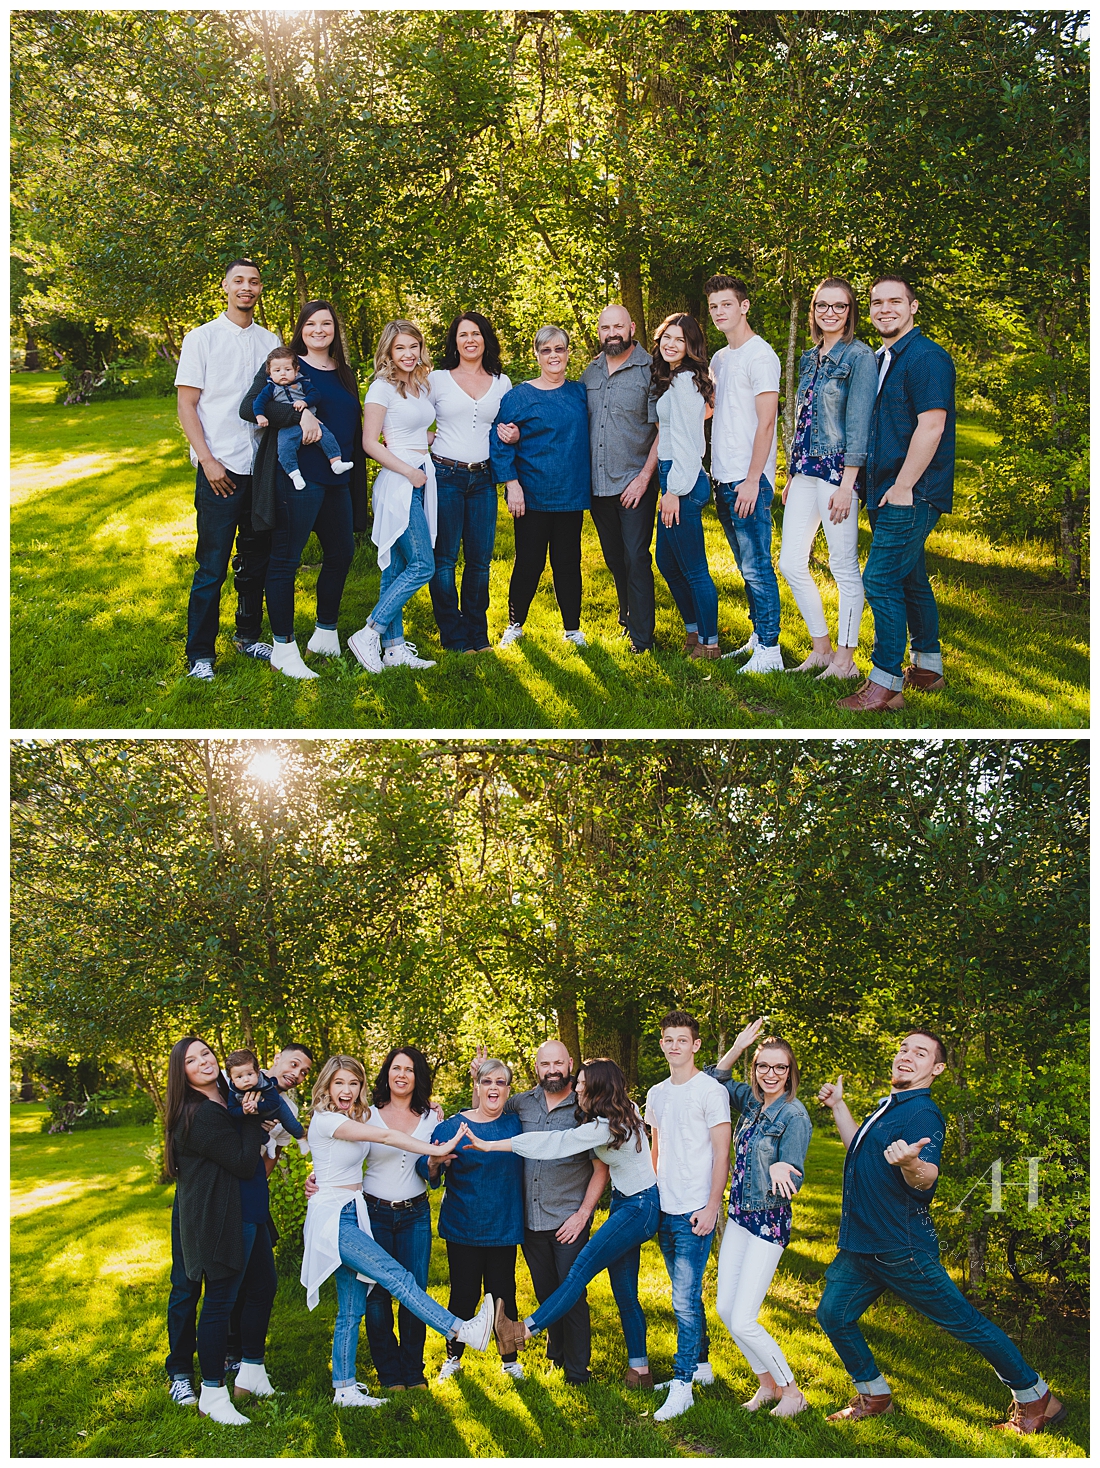 Multi-generational Family Portraits | Candid and Posed Portraits, How to Pose for Family Portraits, Outfit Inspiration | Photographed by Amanda Howse